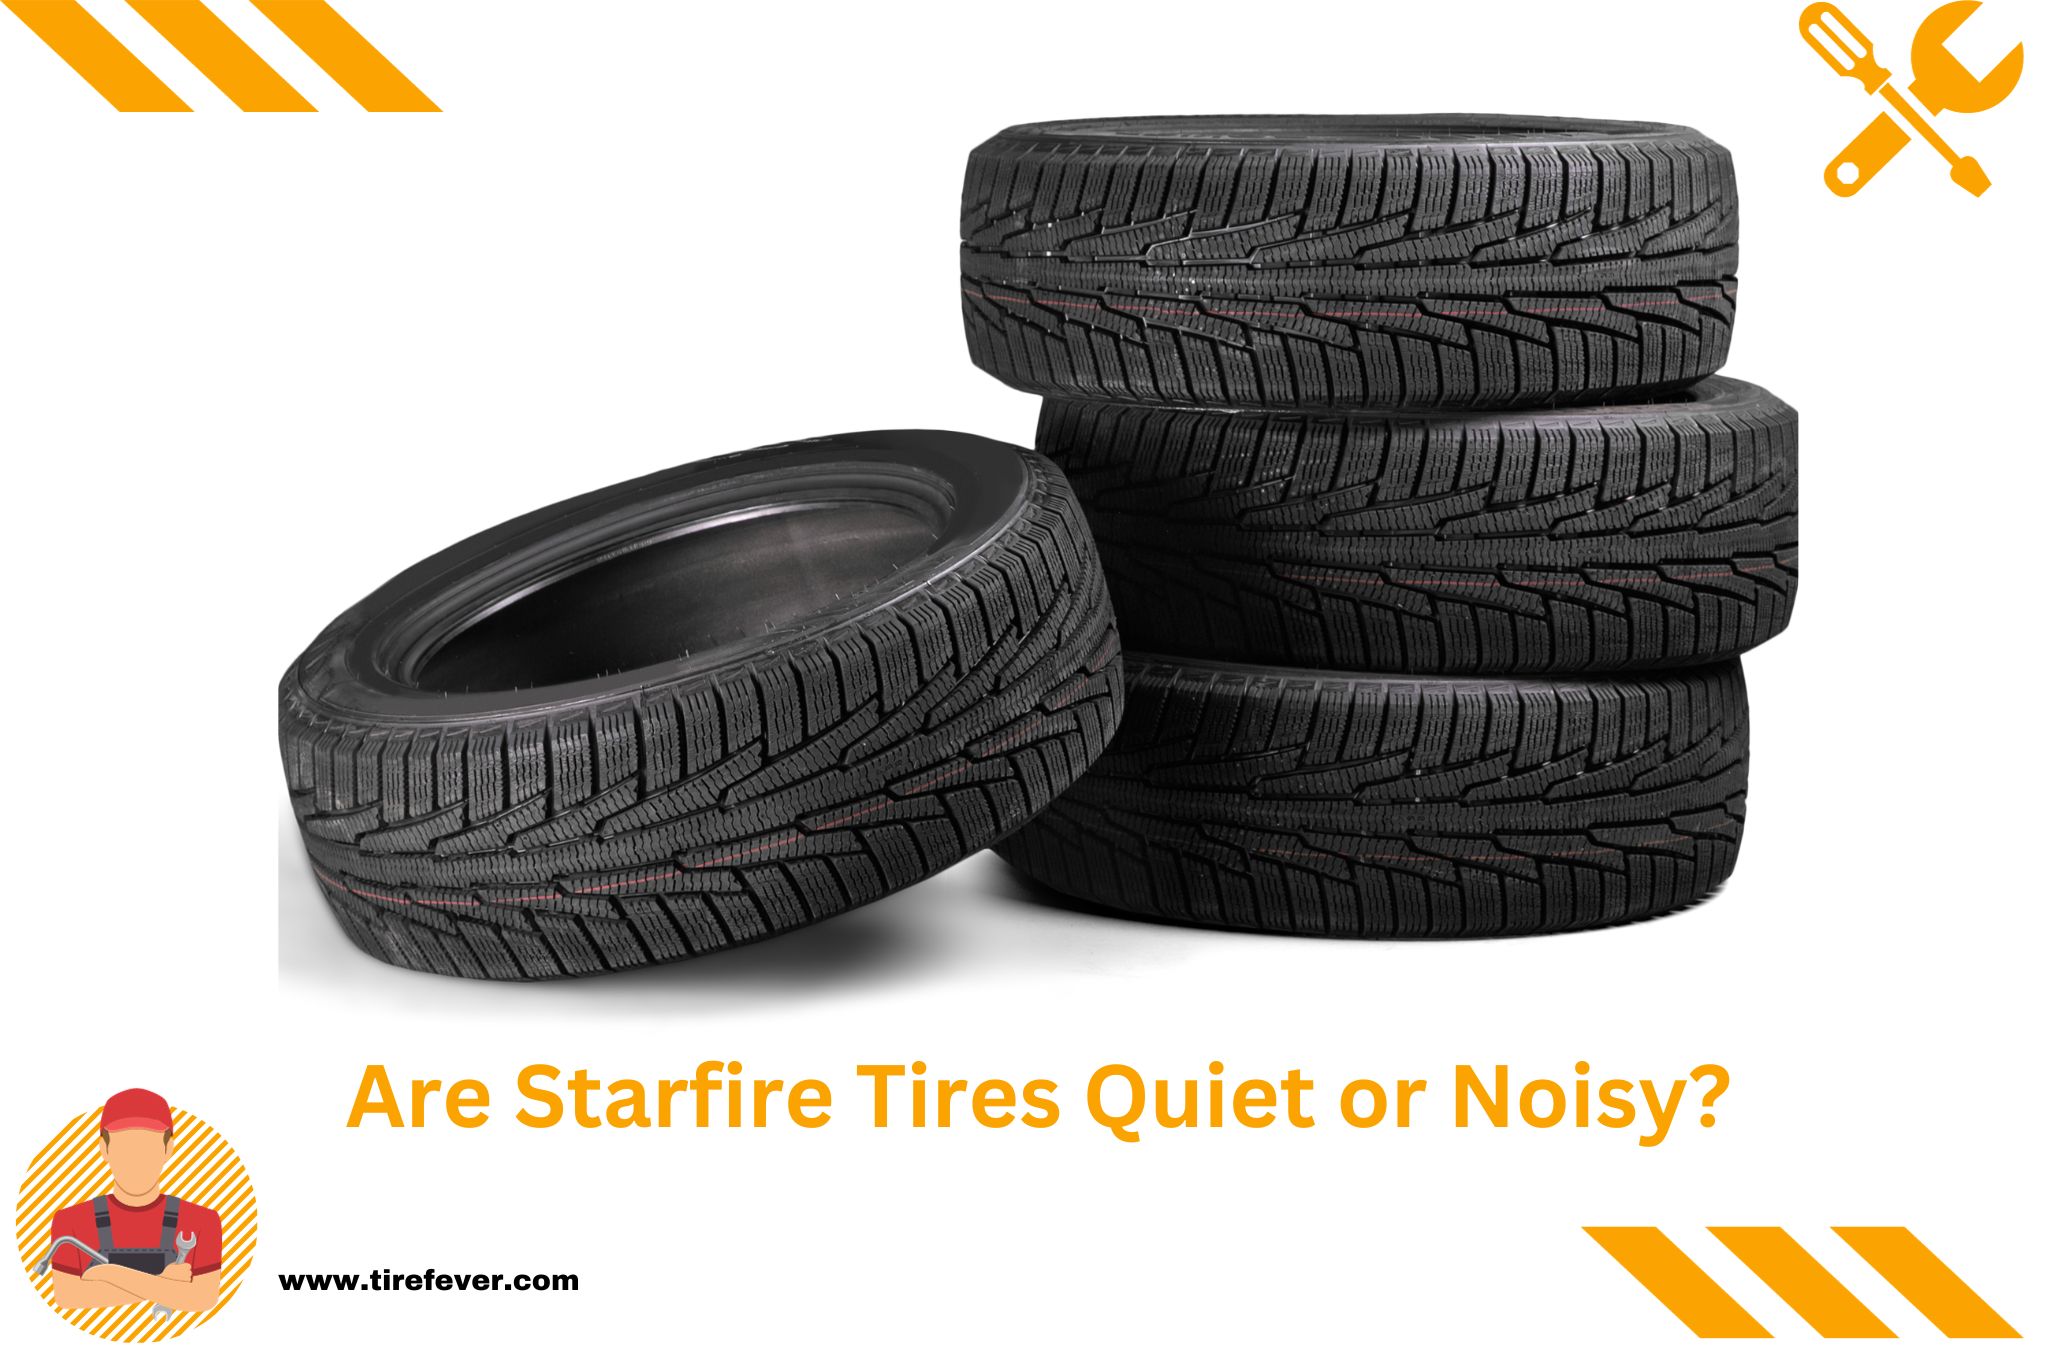 Are Starfire Tires Quiet or Noisy?